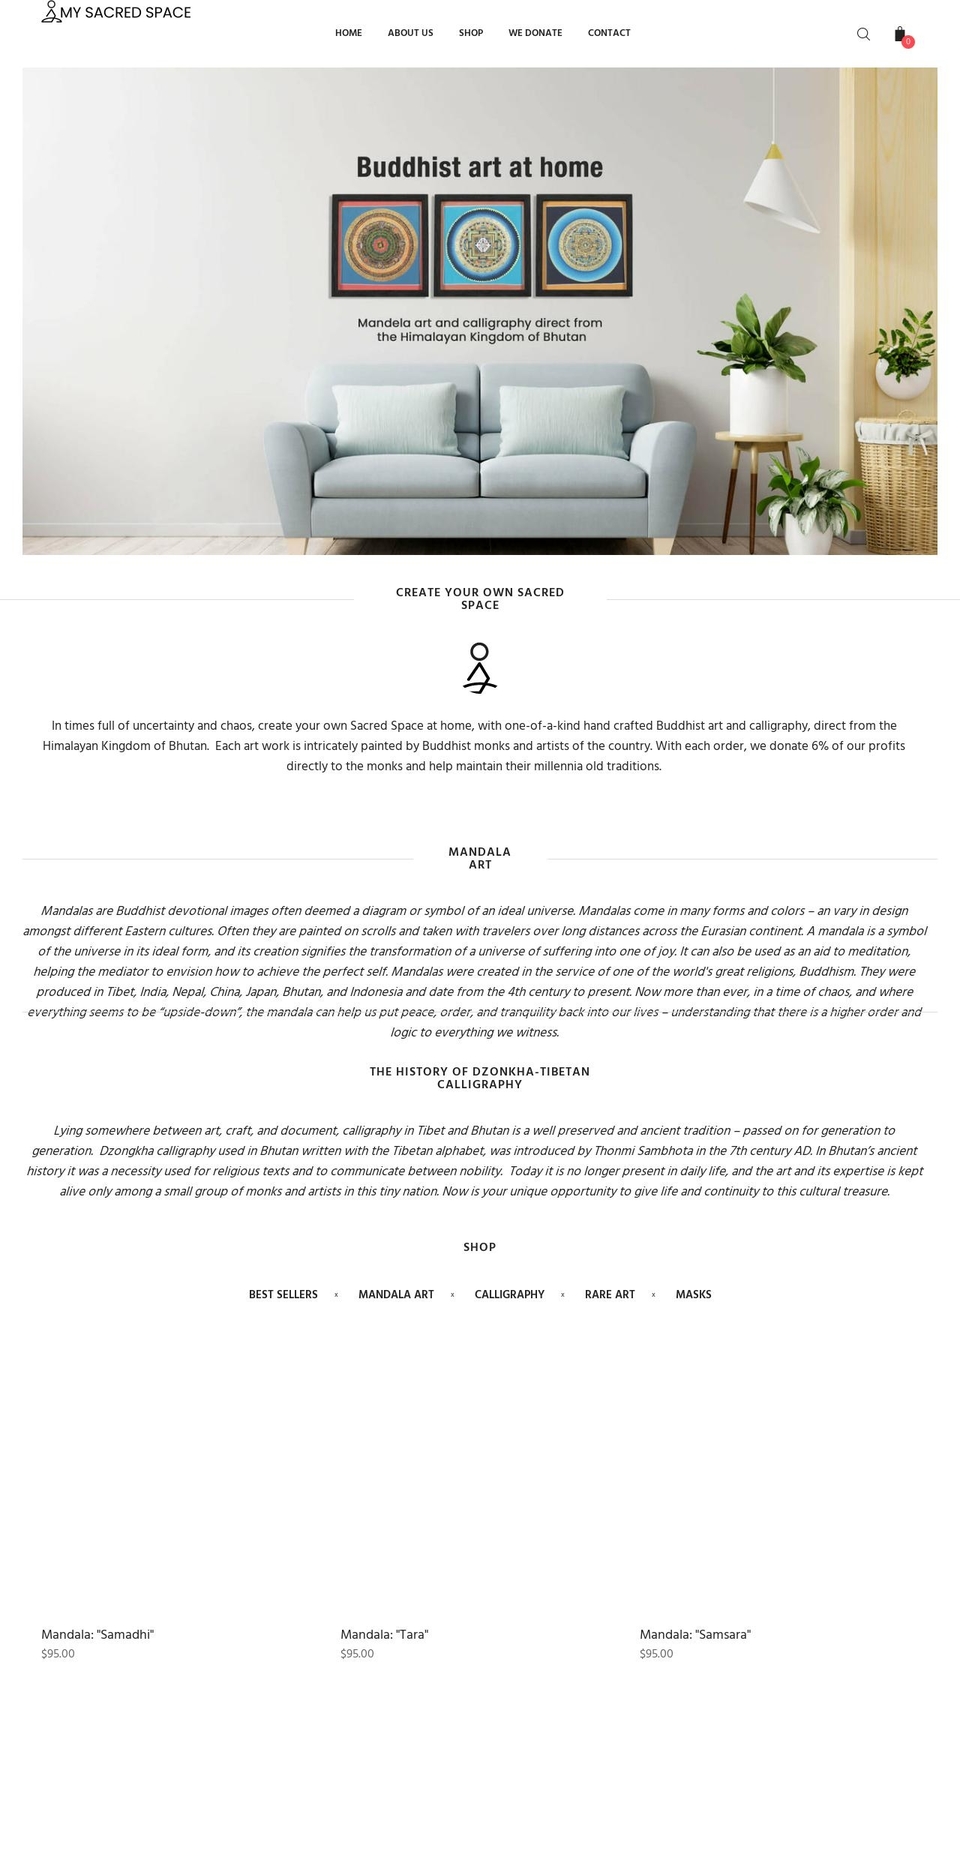 space Shopify theme site example my-sacred-space.com